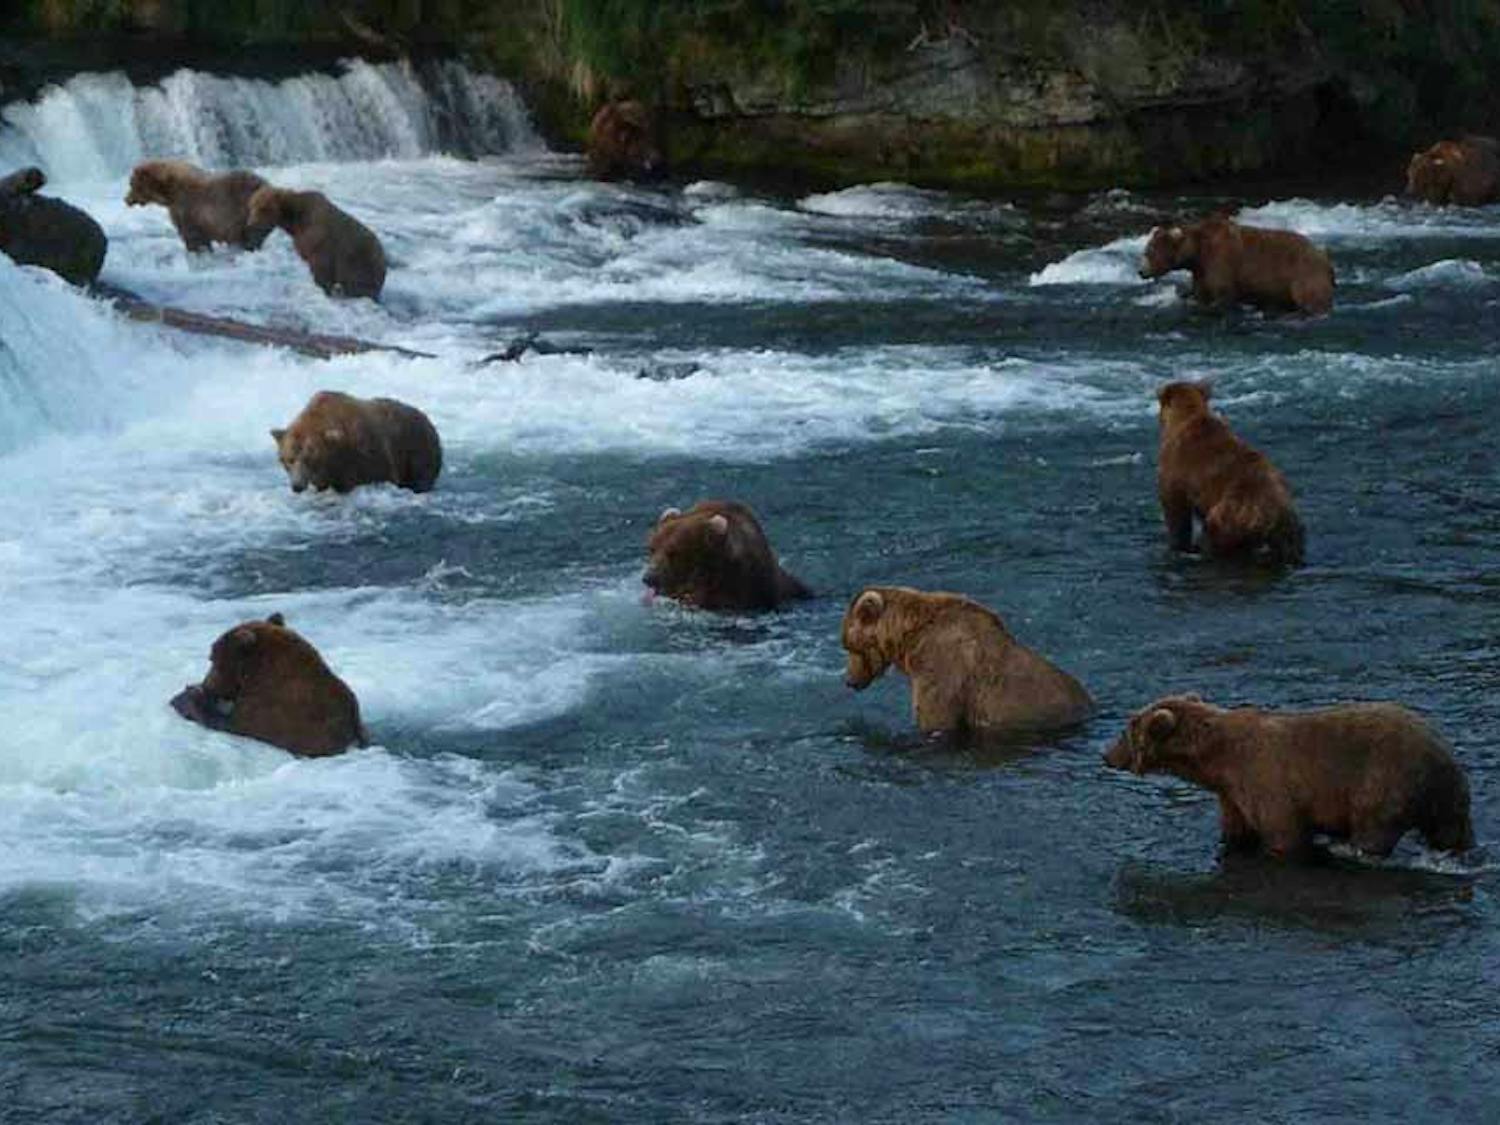 Bears have to eat from 80 to 90 pounds of food every day in the summer and fall in order to prepare for winter hibernation. They may lose up to one-third of that weight before waking up in the spring. (Photo courtesy of the National Park Service/“Bears at Falls in July.” January 18, 2018).